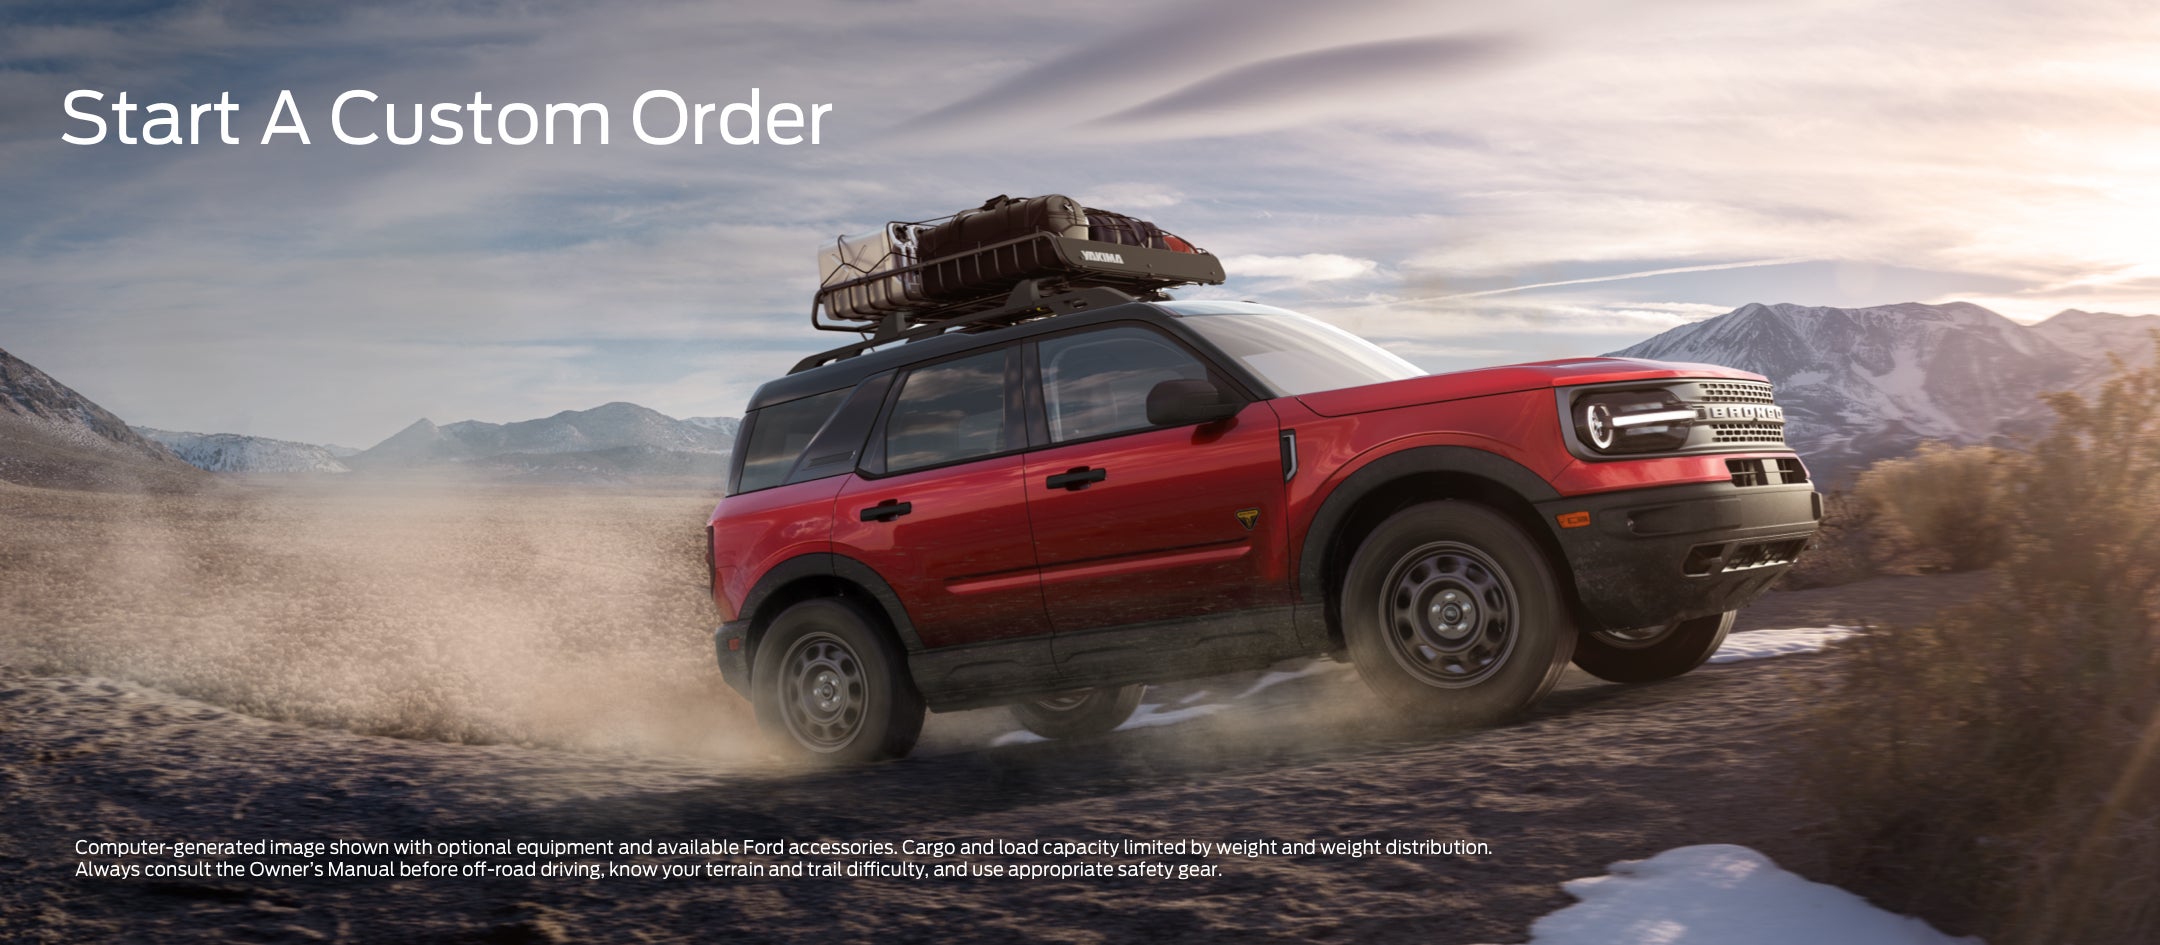 Start a custom order | Rogers Ford Sales in Midland TX